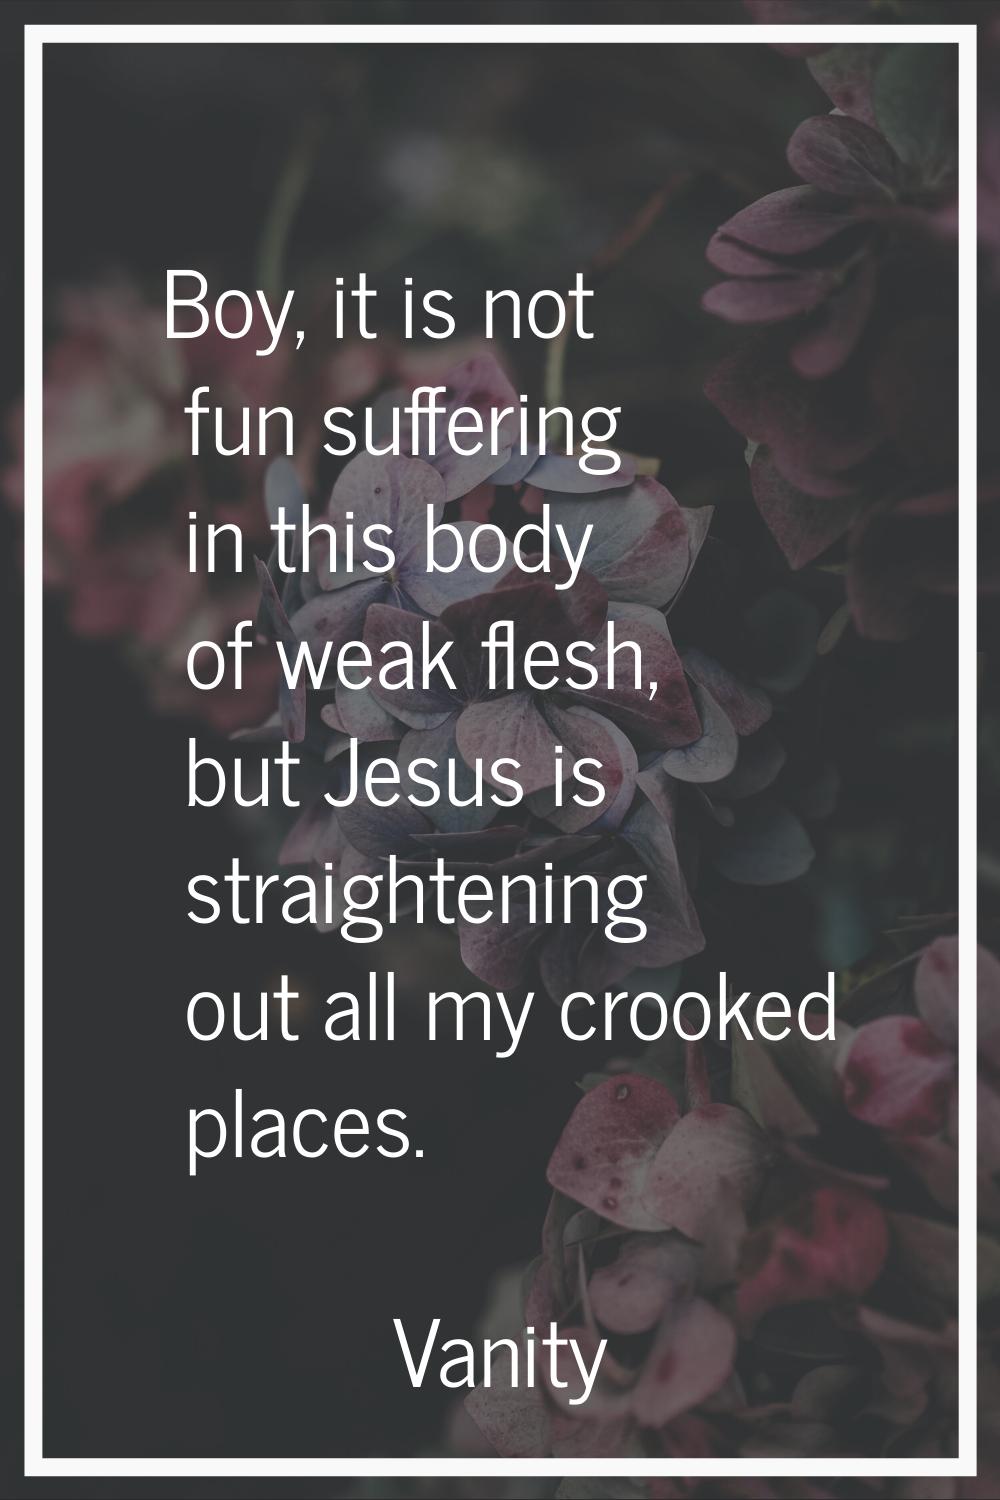 Boy, it is not fun suffering in this body of weak flesh, but Jesus is straightening out all my croo